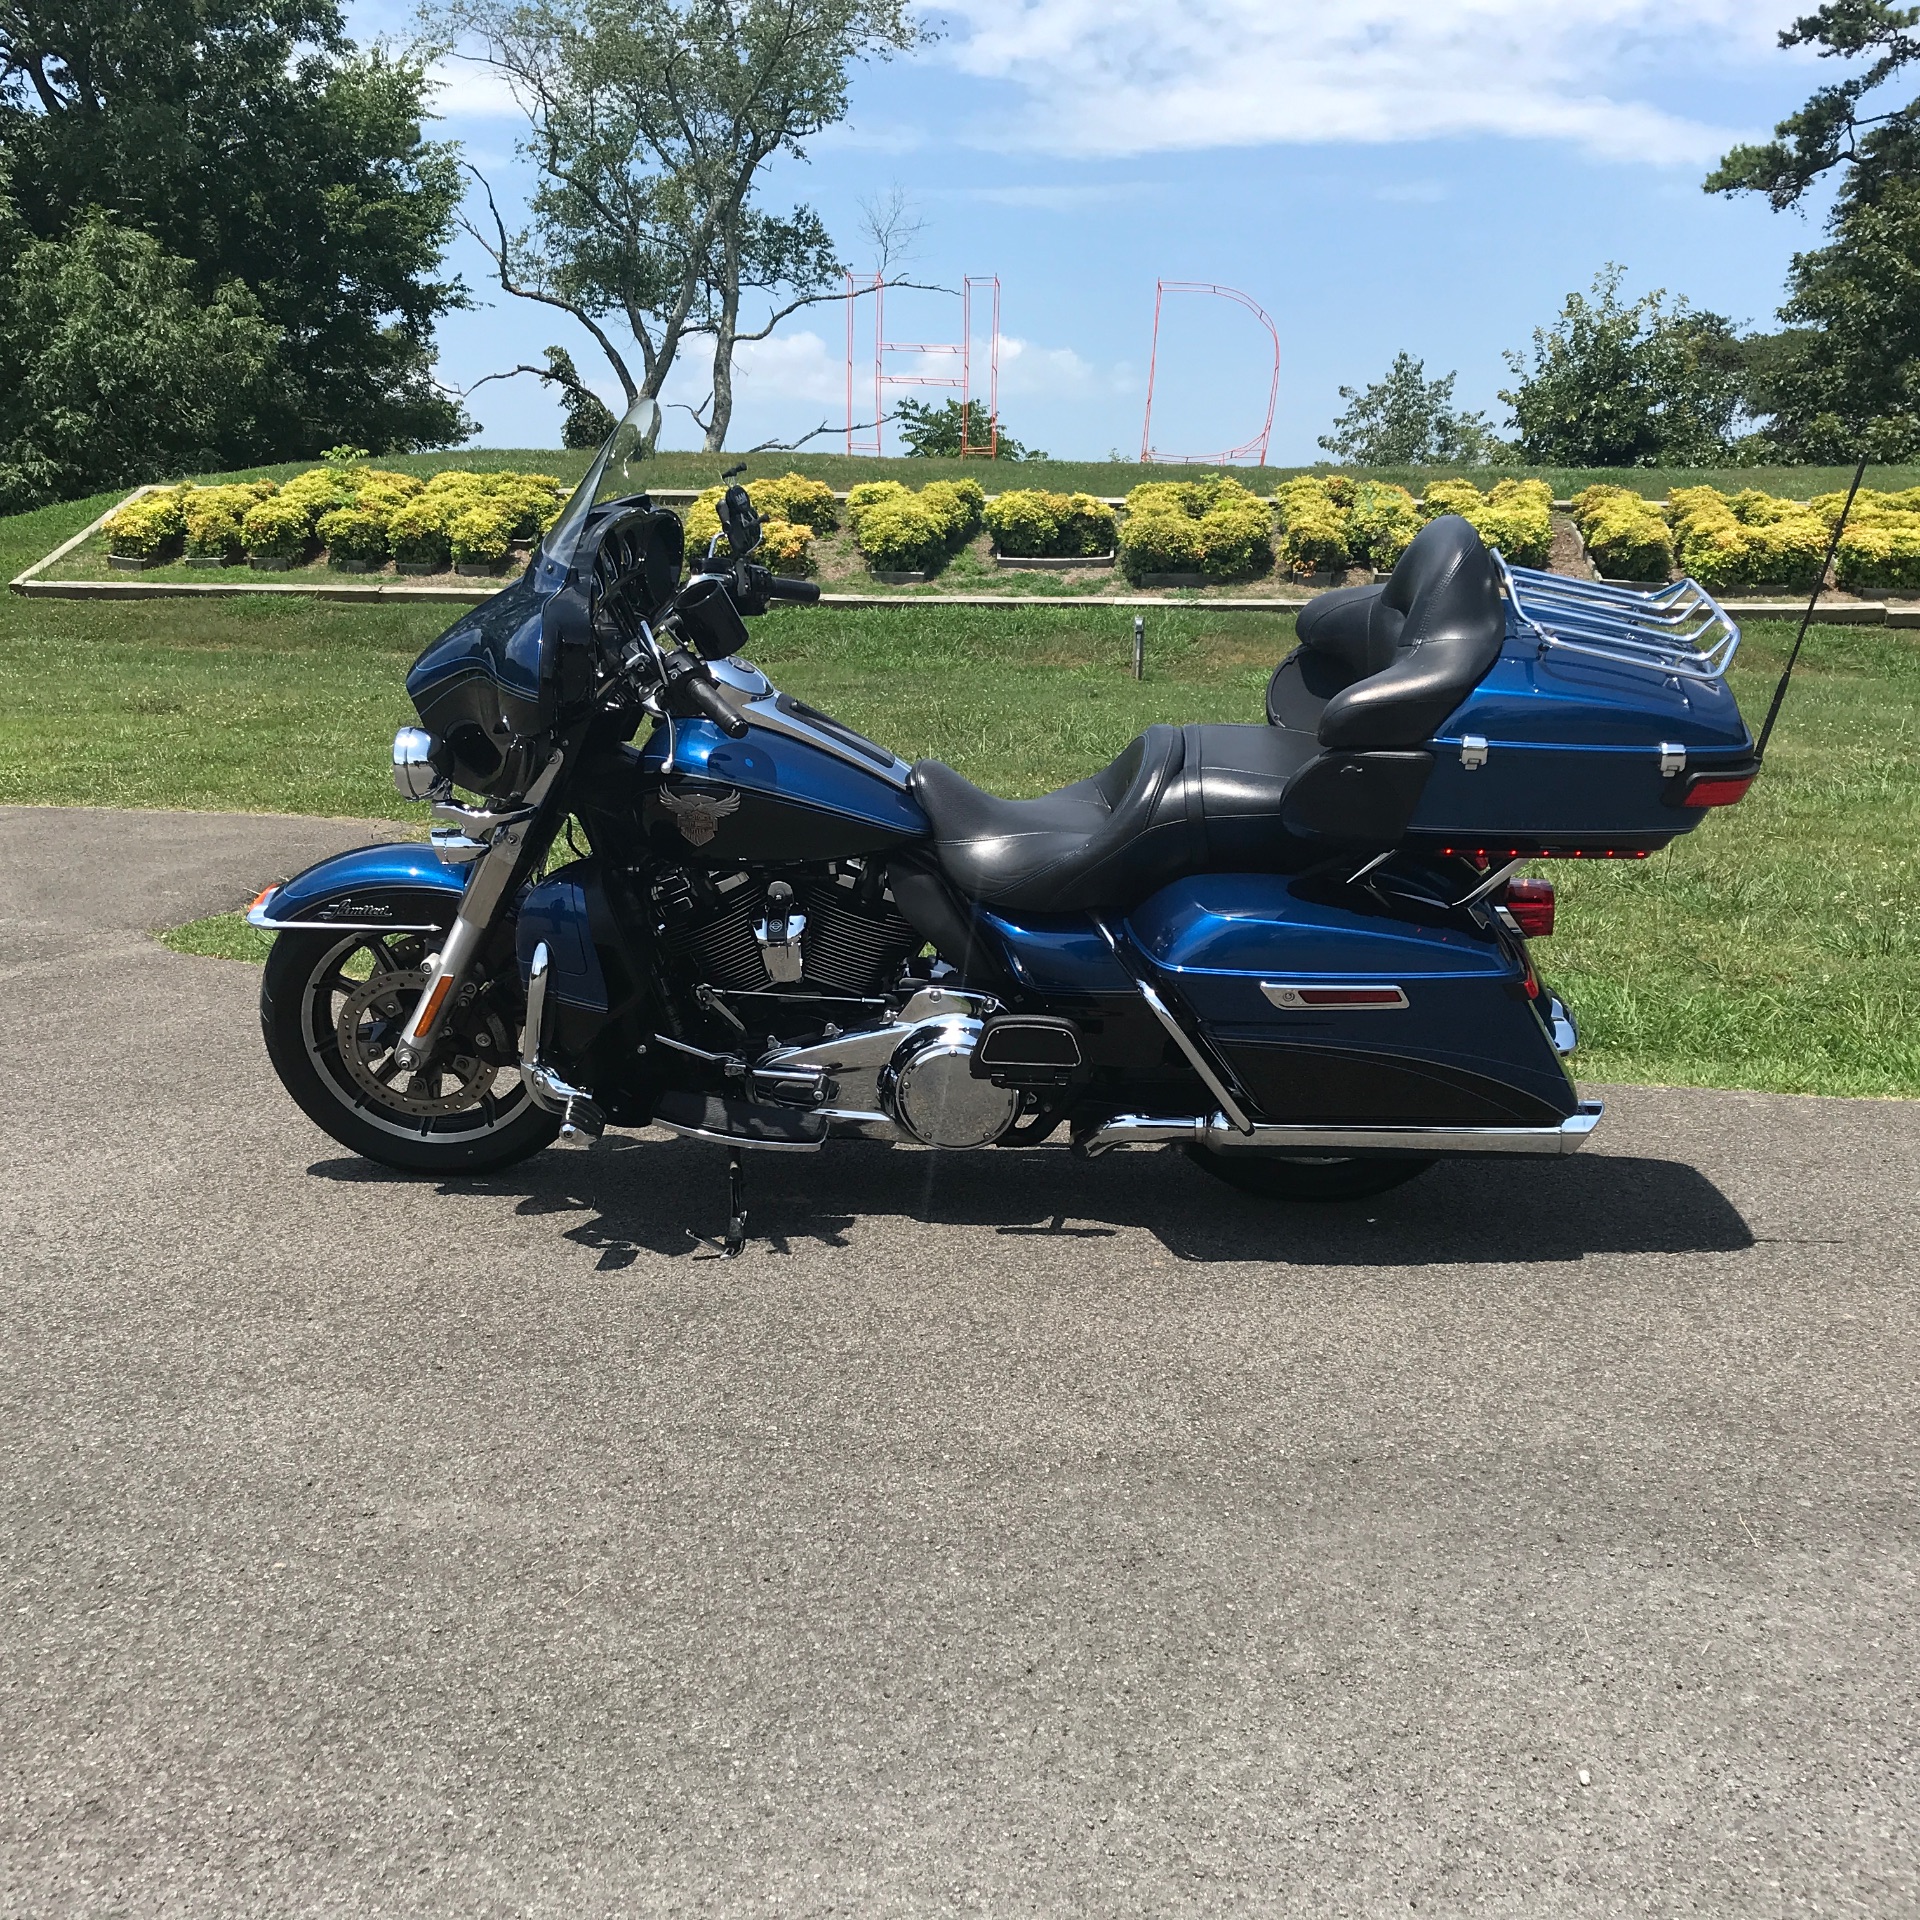 2018 Harley-Davidson Electra Glide Ultra Limited in Morristown, Tennessee - Photo 5